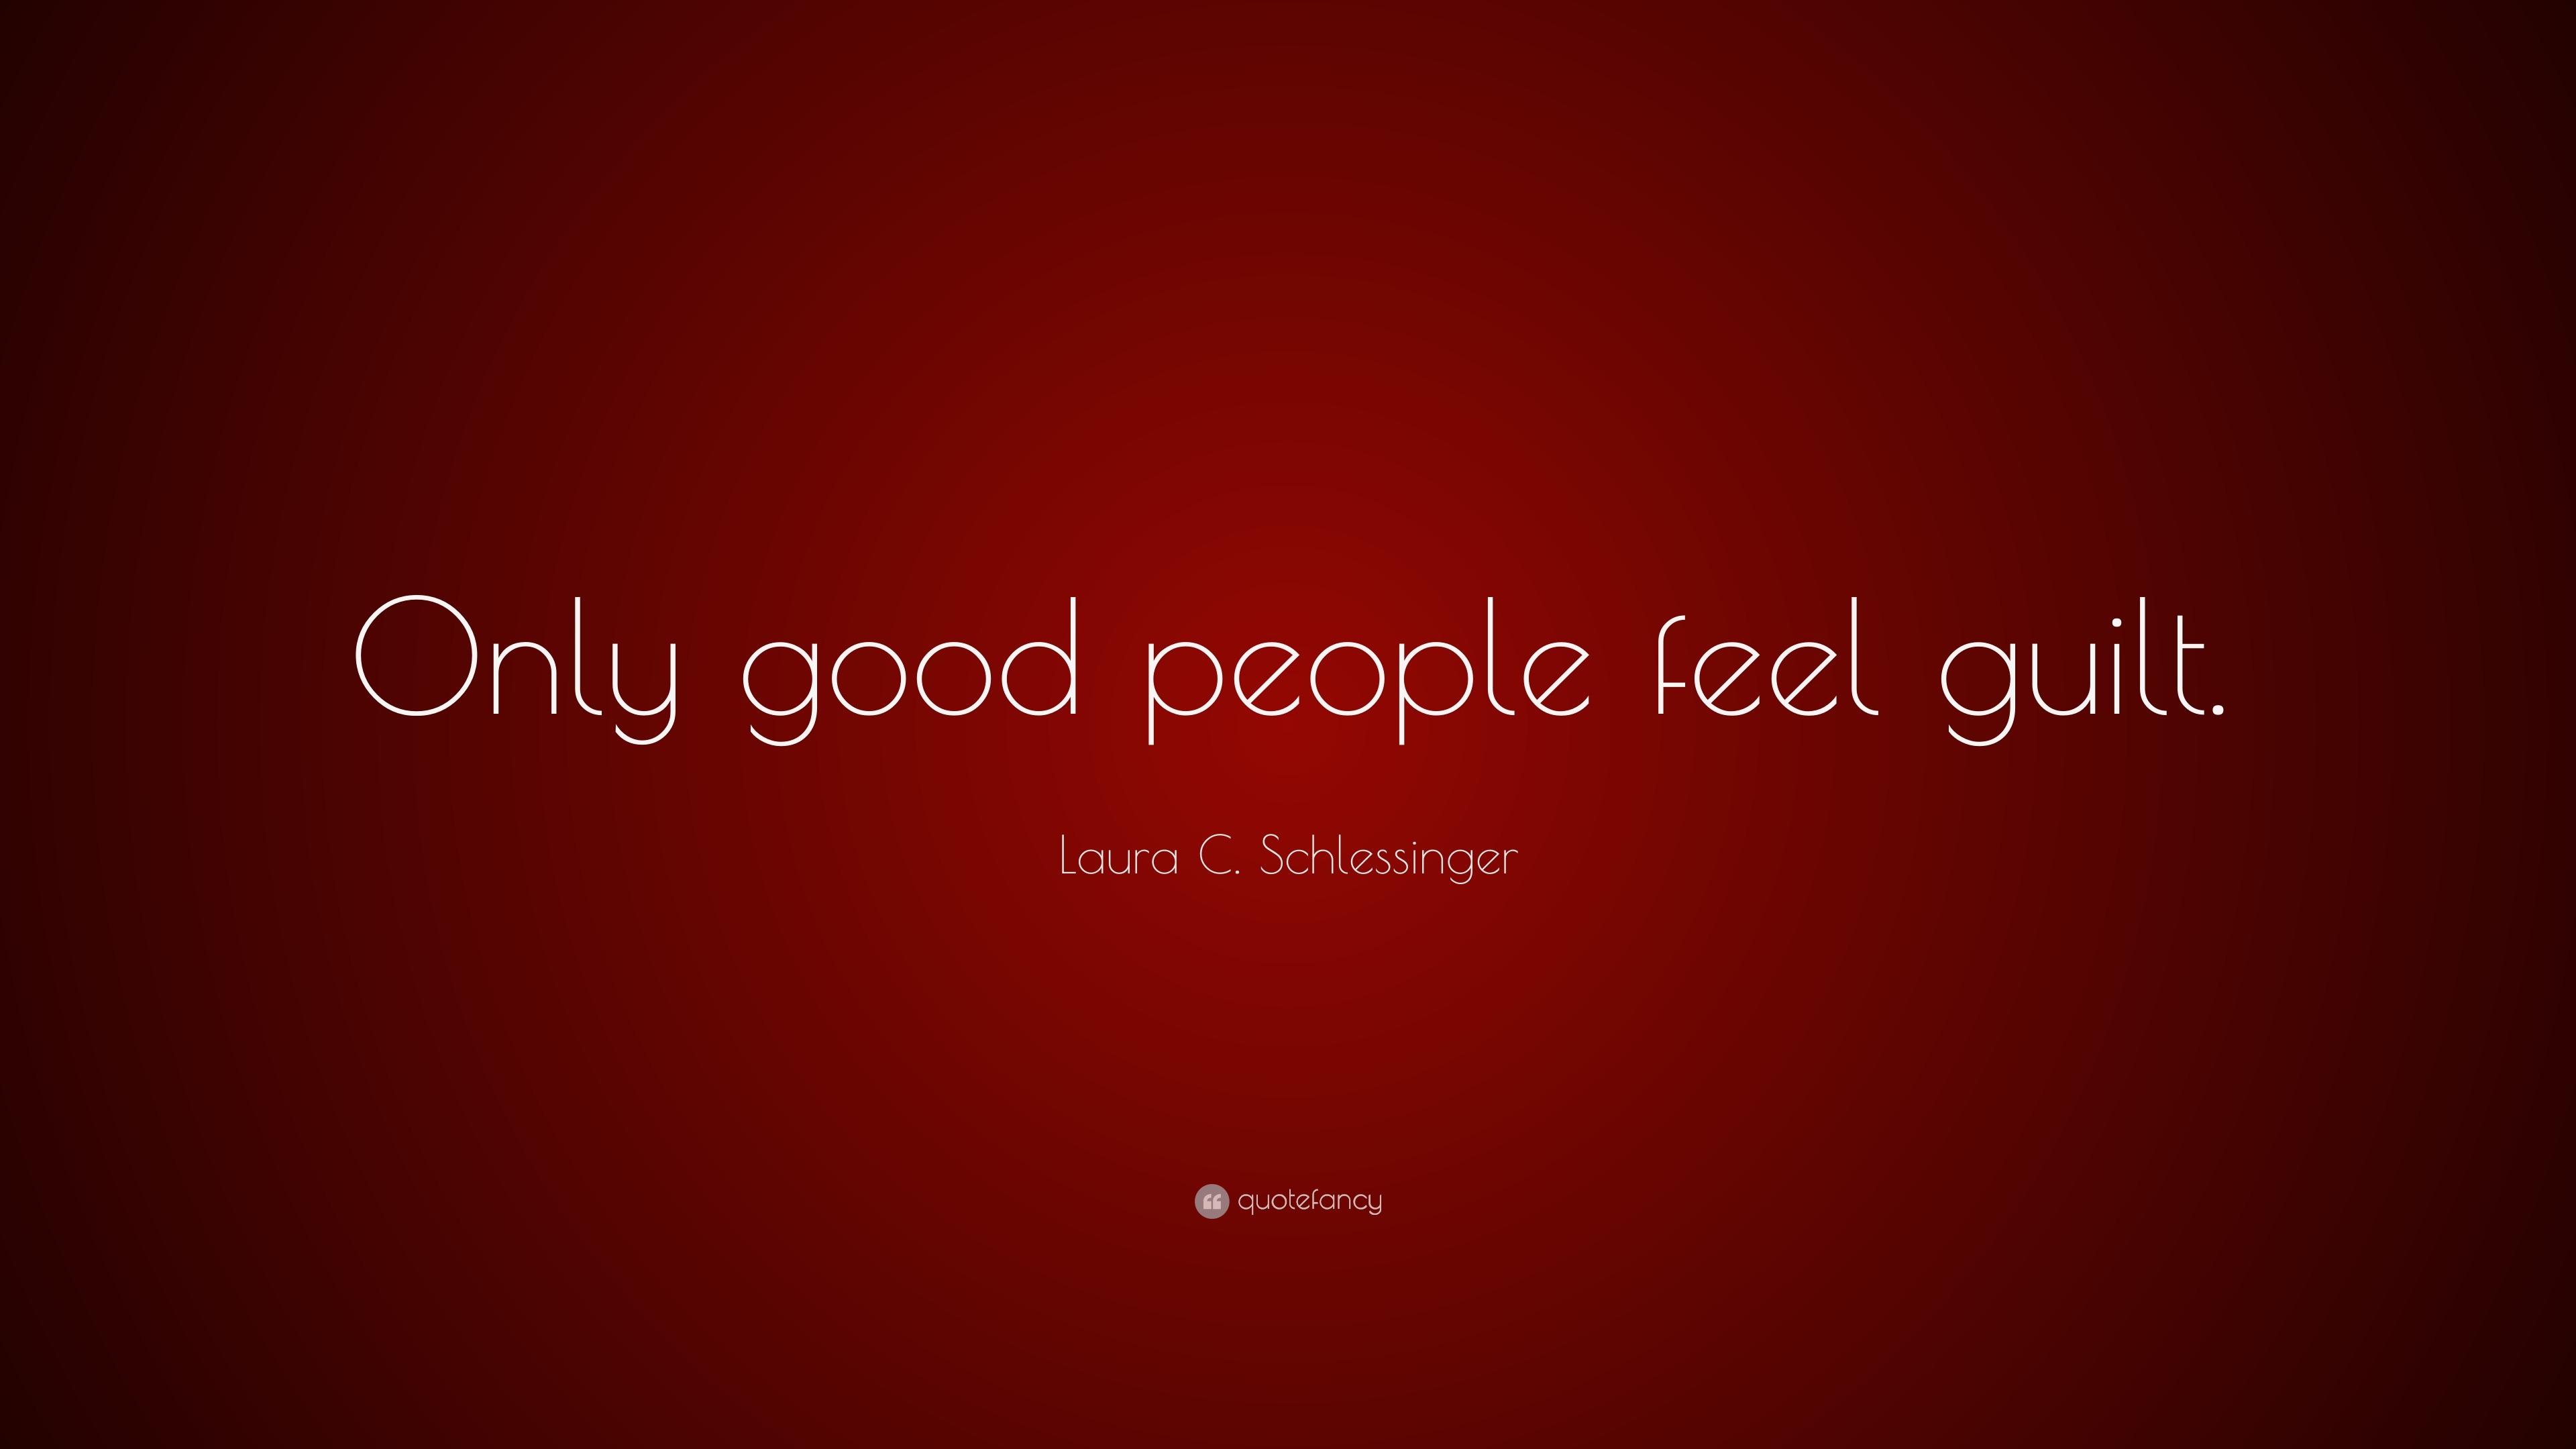 Laura C. Schlessinger Quote: “Only good people feel guilt.”